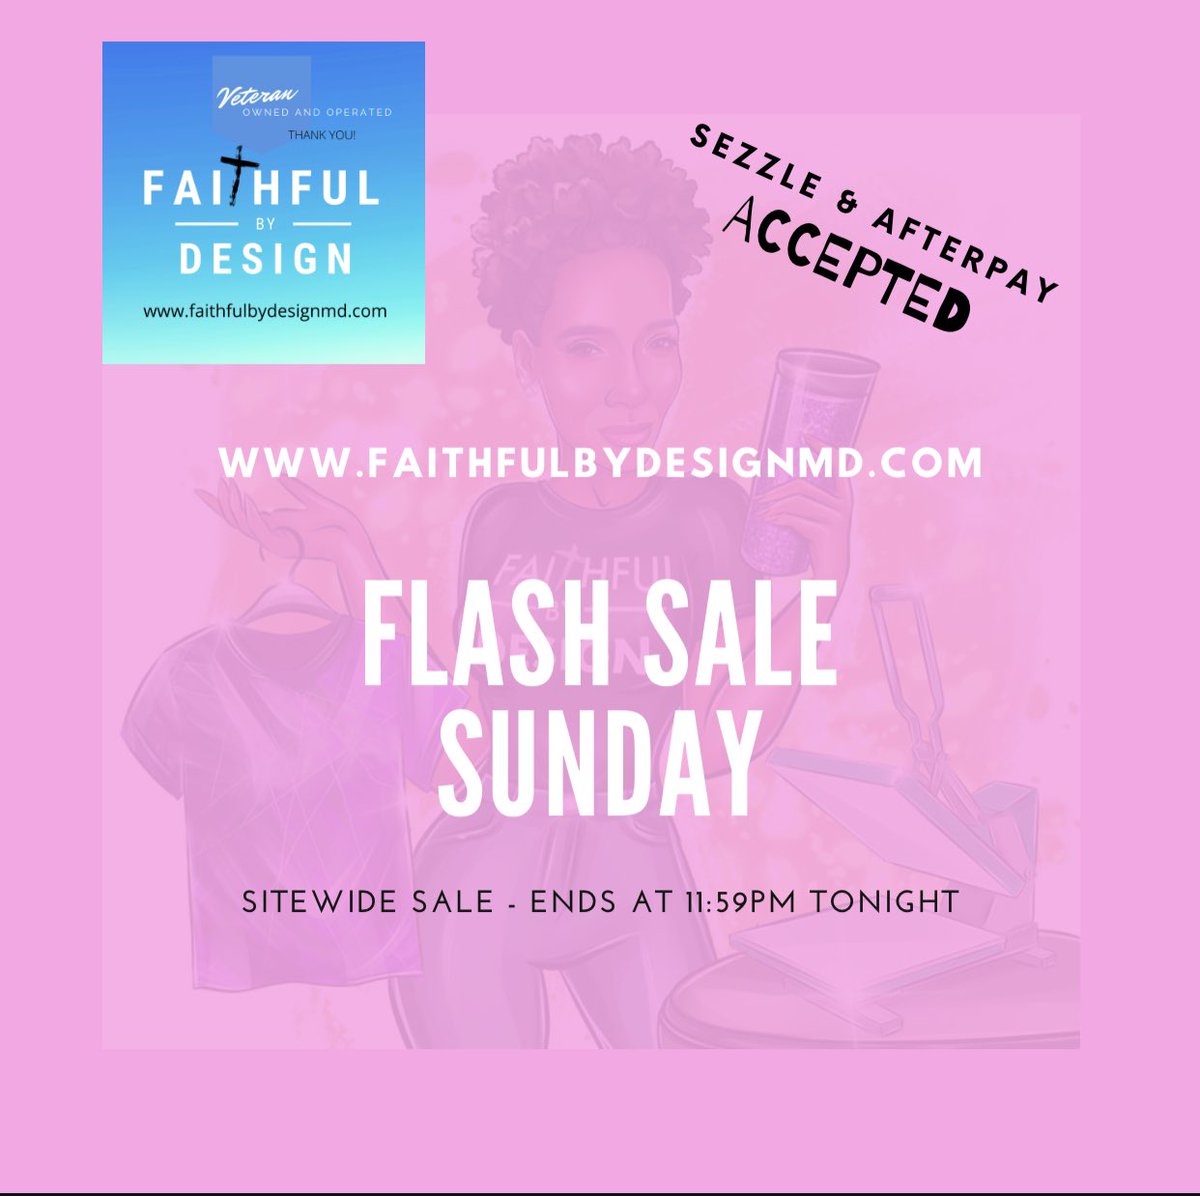 Sitting here watching the football games and thought we would run a #flashsale.   Link is in our bio. #tshirt #football #sezzleaccepted #afterpayaccepted #onlineshopping #blankets #cups #journals #smallbusiness